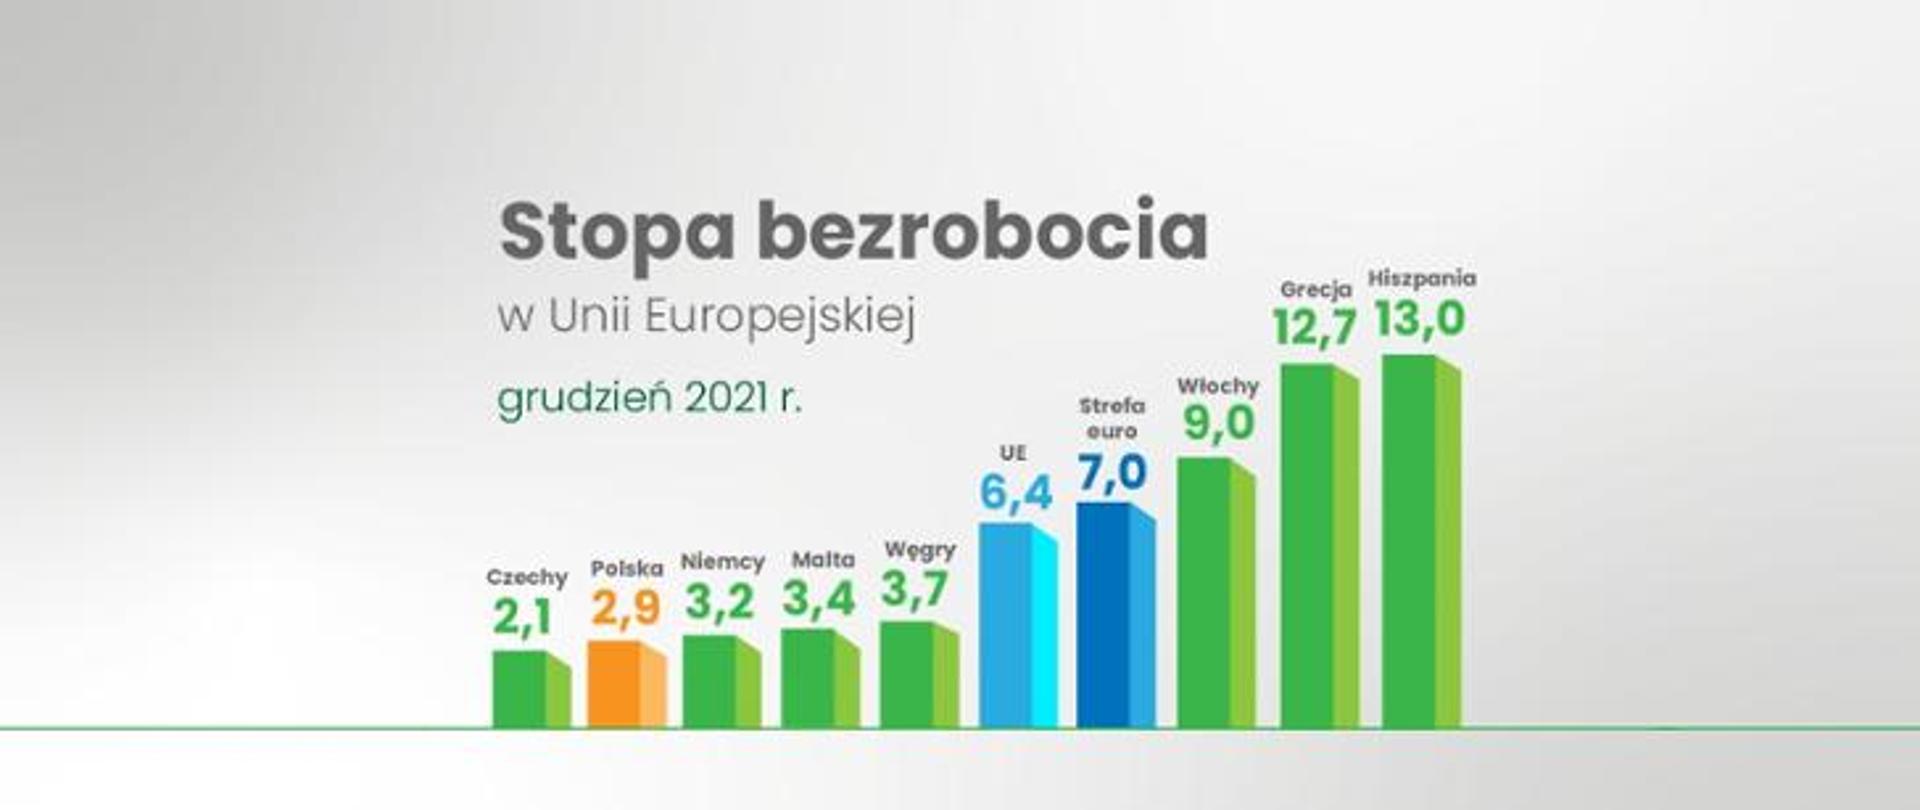 Eurostat - Poland in second place with the lowest unemployment in the European Union